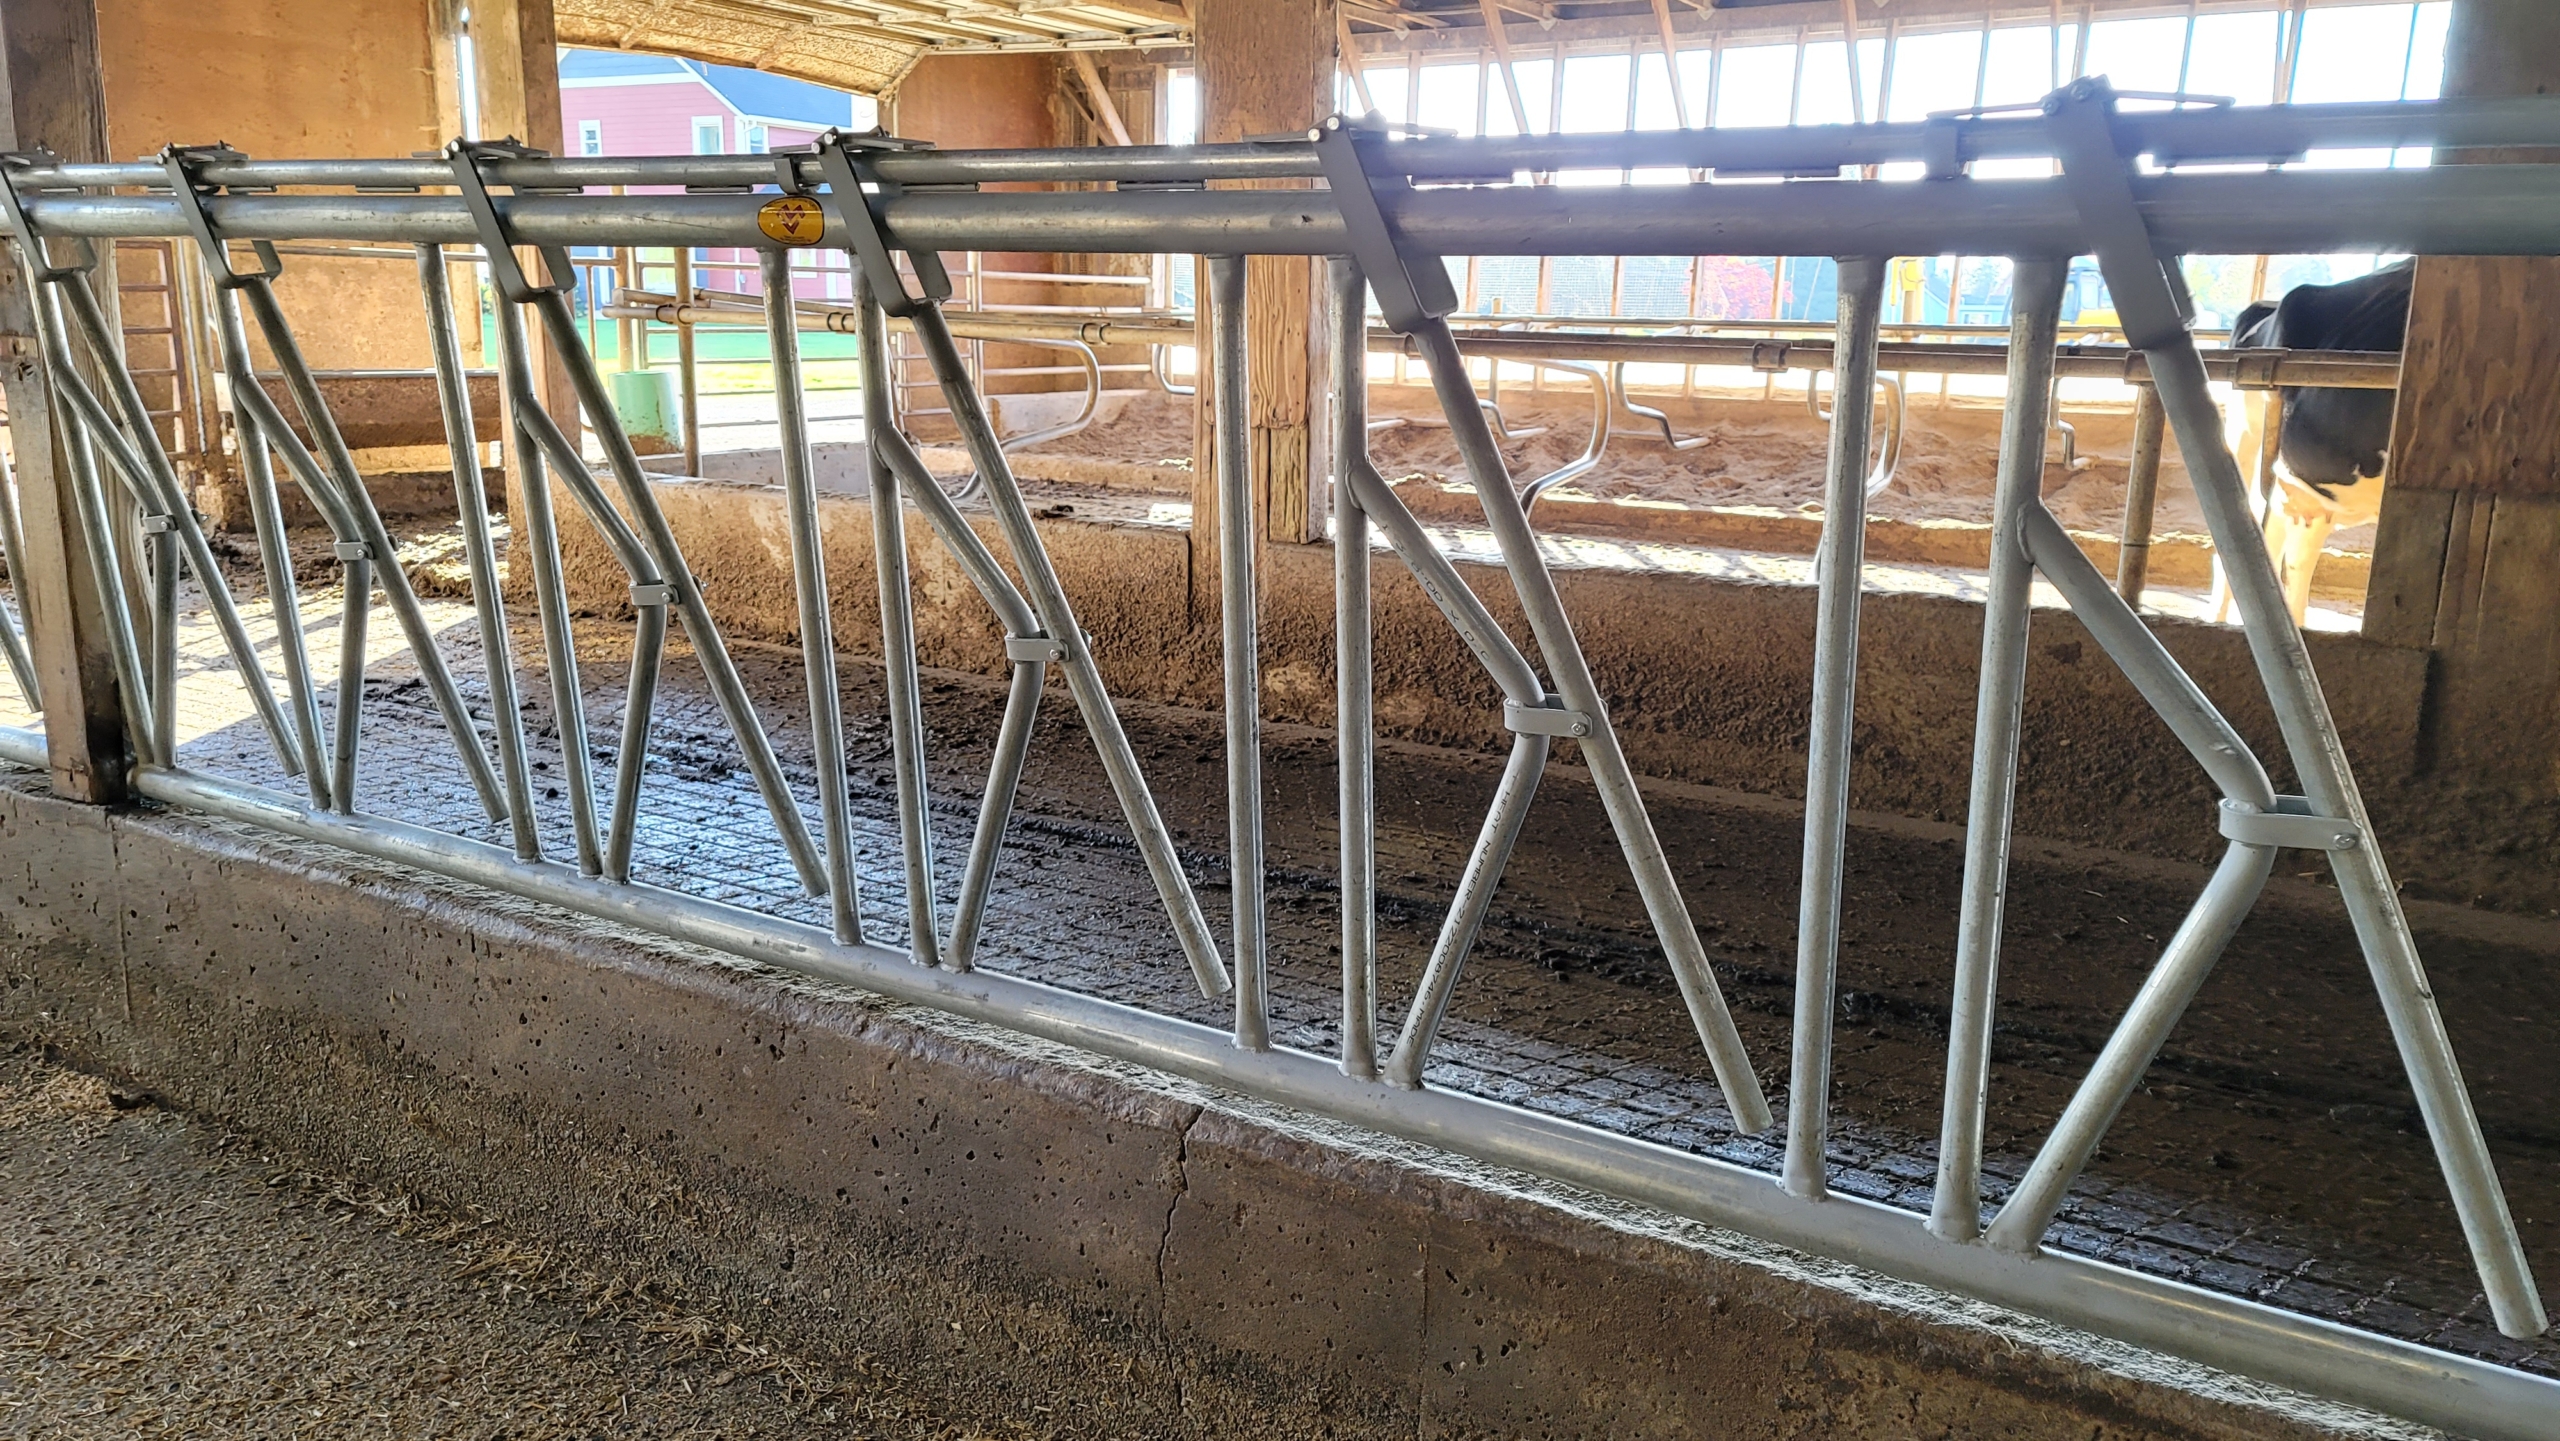 Dairy cow barn with metal cow stanchions.